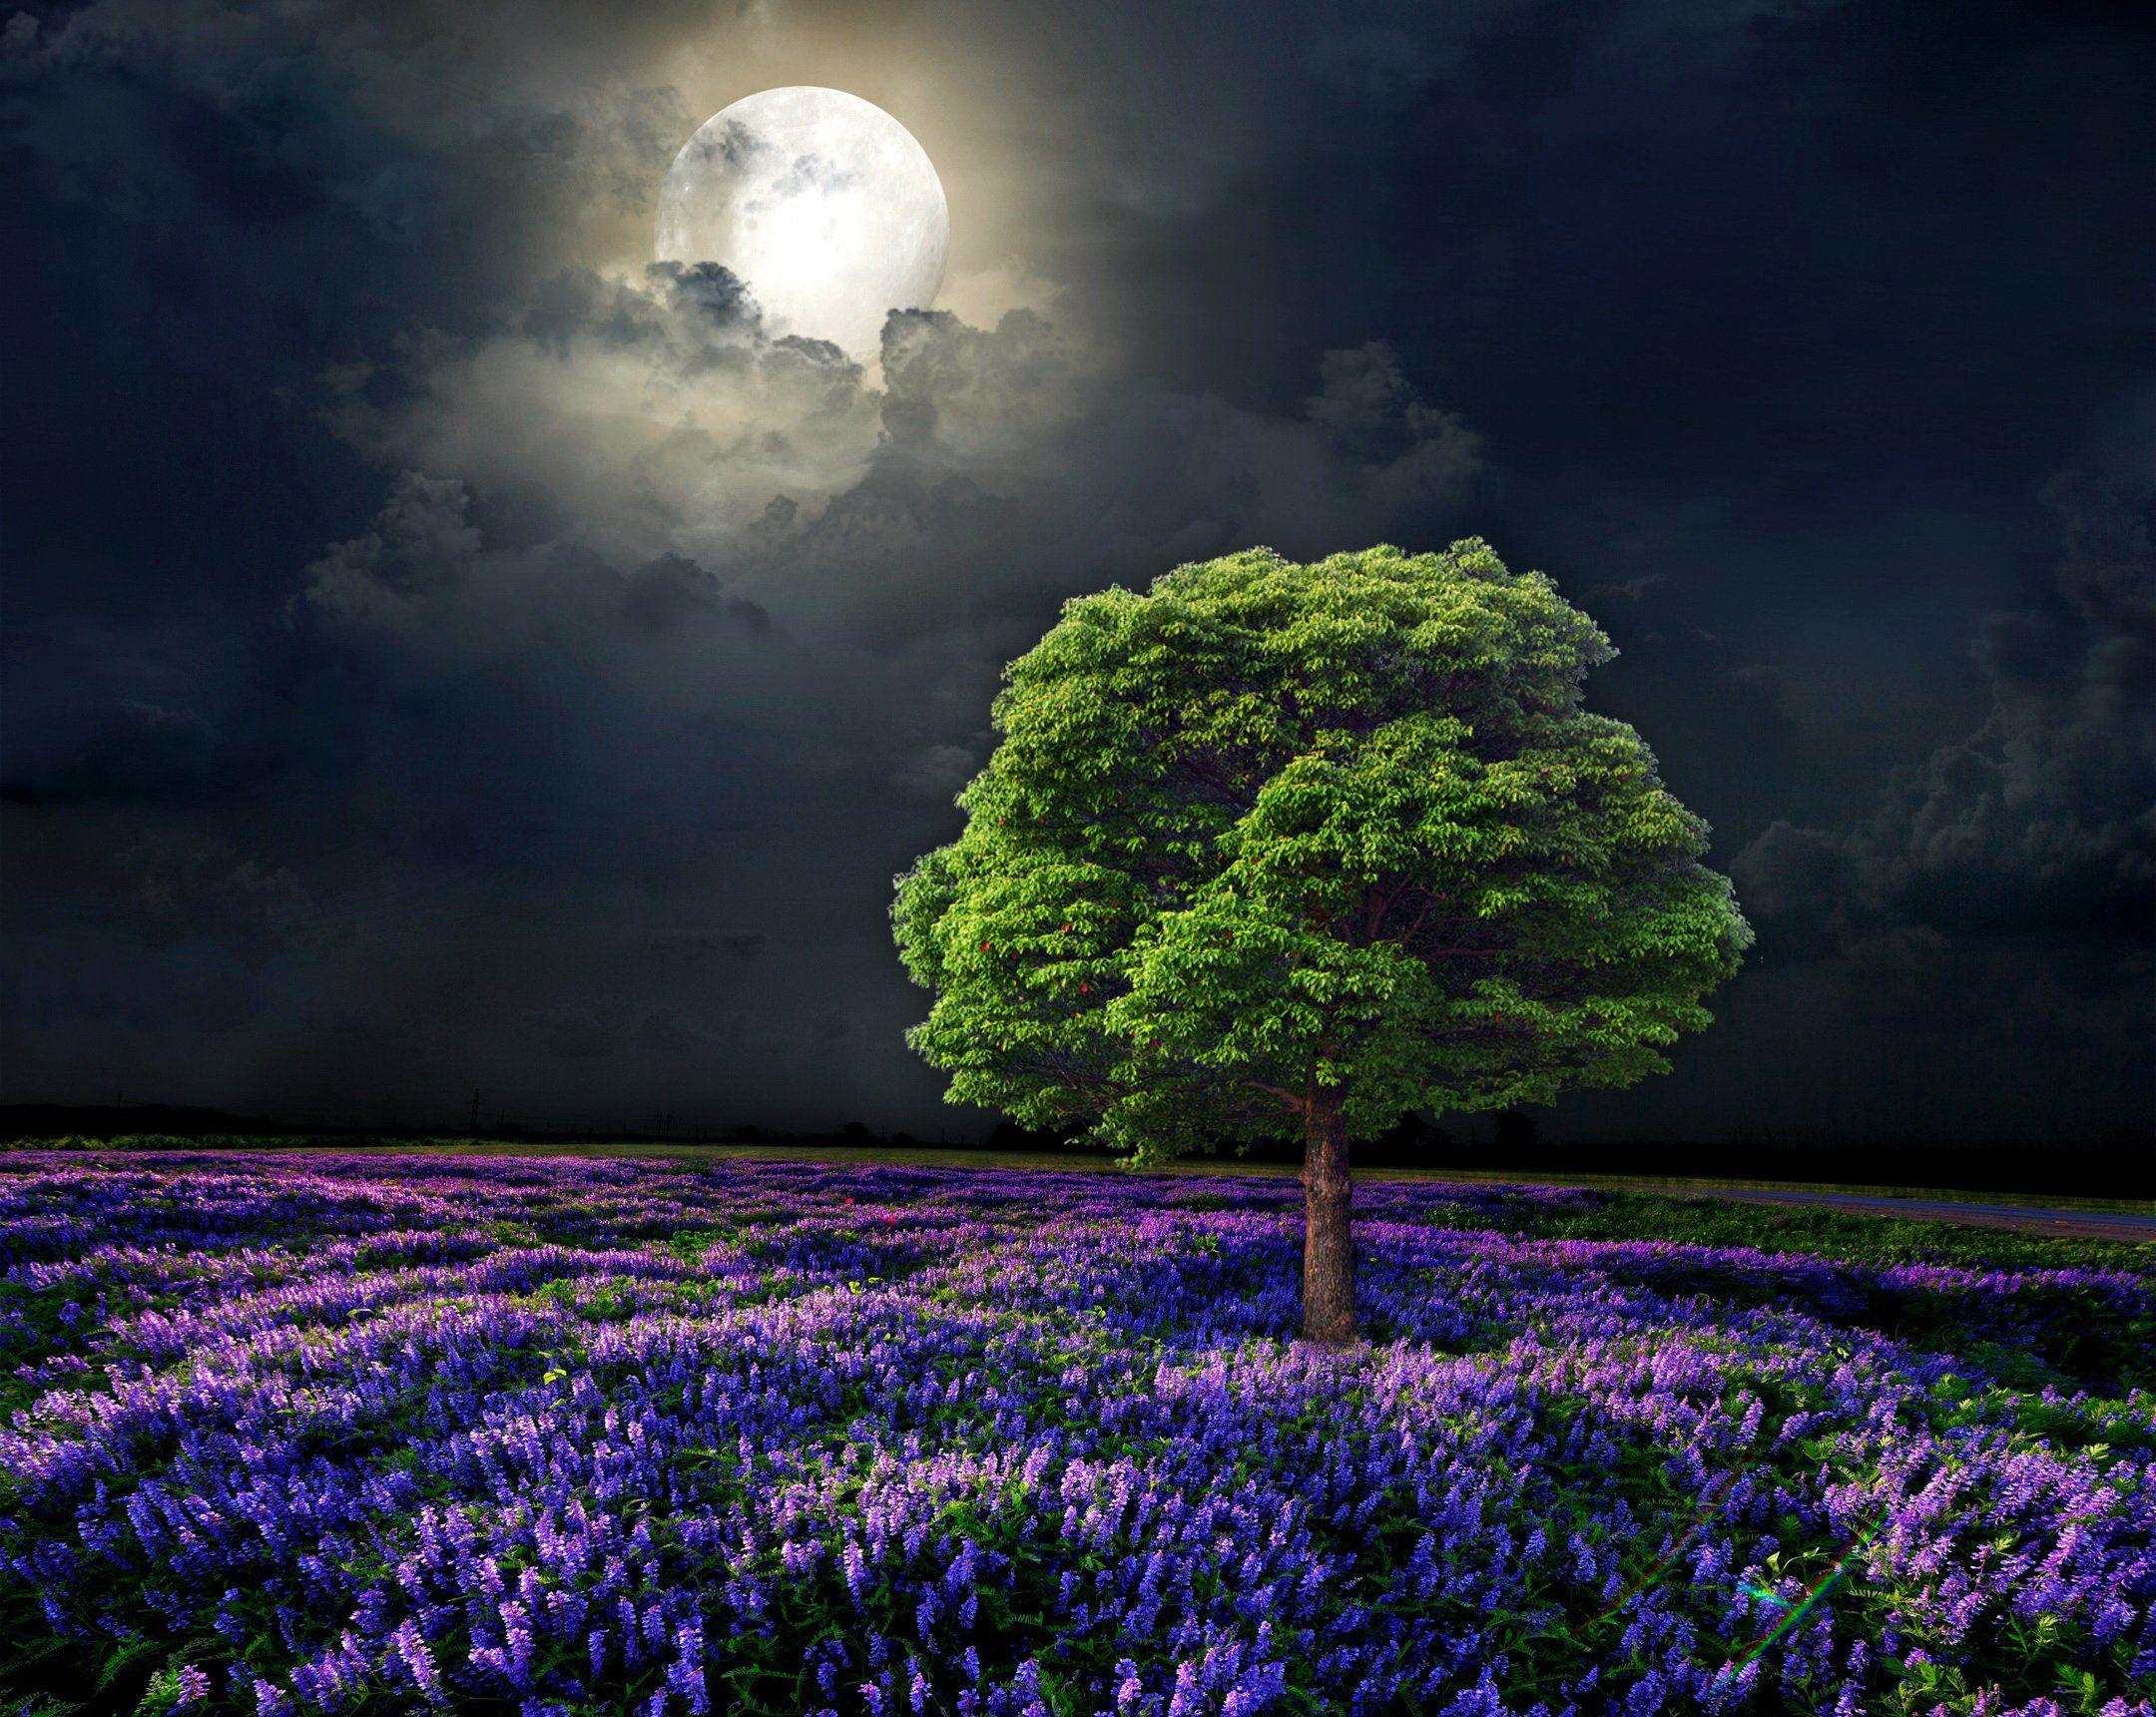 Night Scenery Wallpapers - Top Free Night Scenery Backgrounds